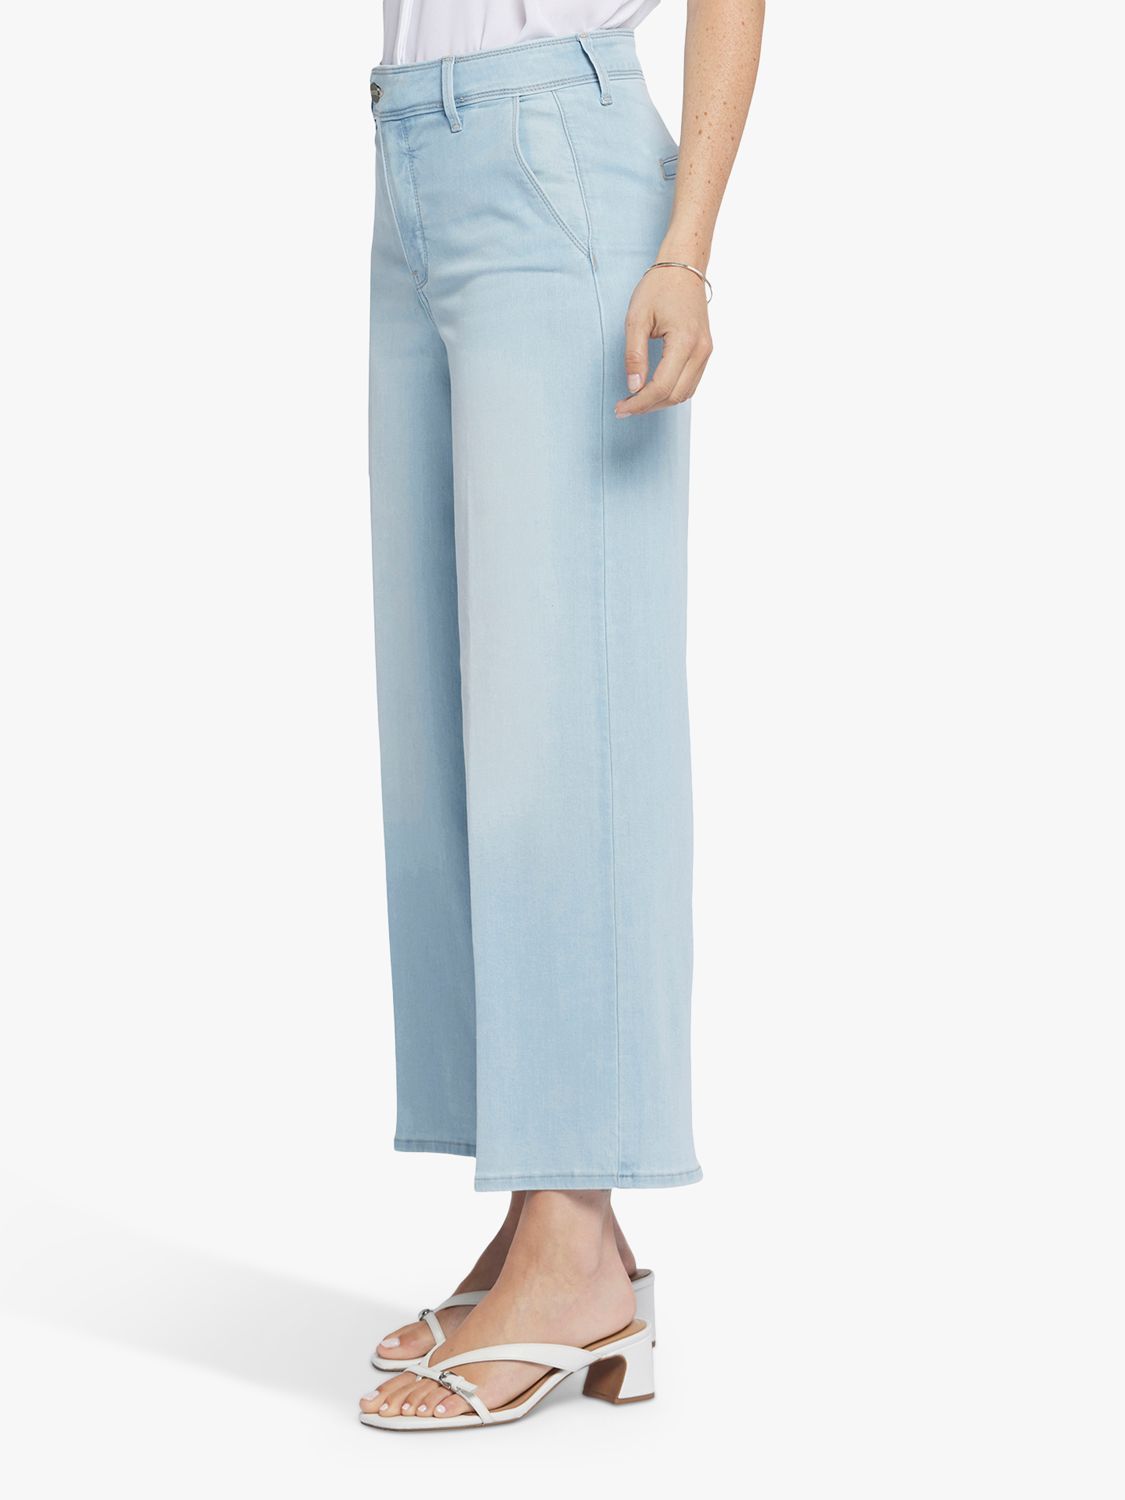 Buy NYDJ Mona High Rise Wide Leg Ankle Jeans Online at johnlewis.com